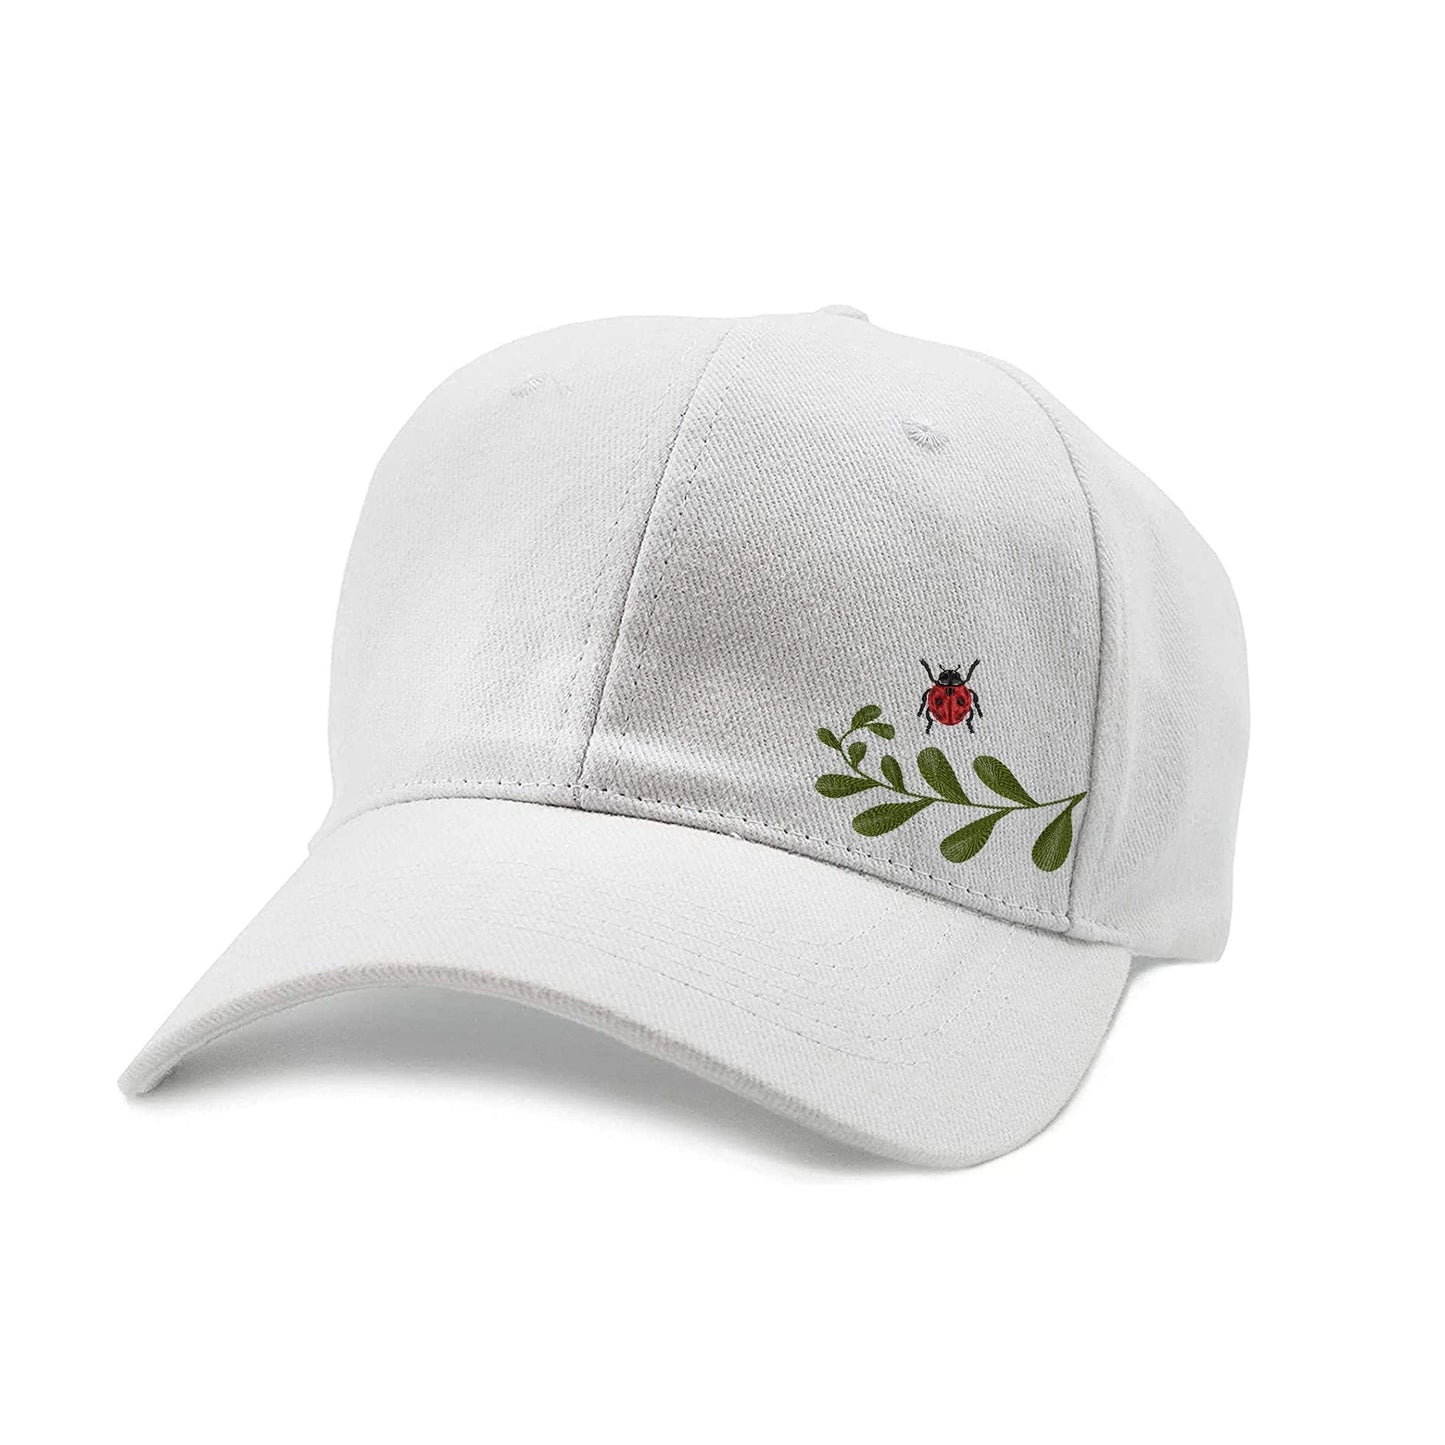 Beetle Insects Machine Embroidery Design on cap